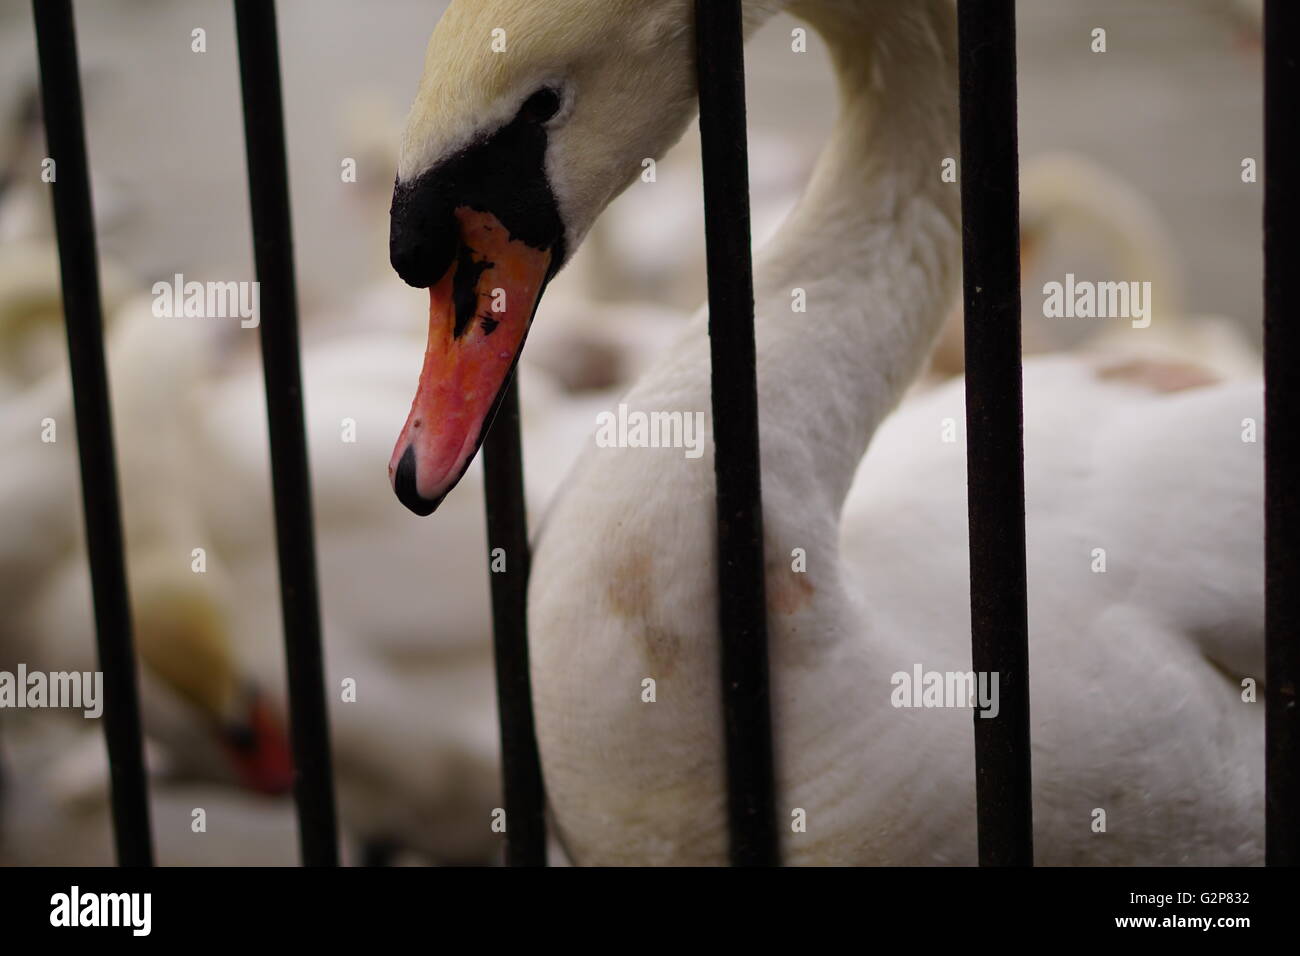 Swan with its head through bars Stock Photo